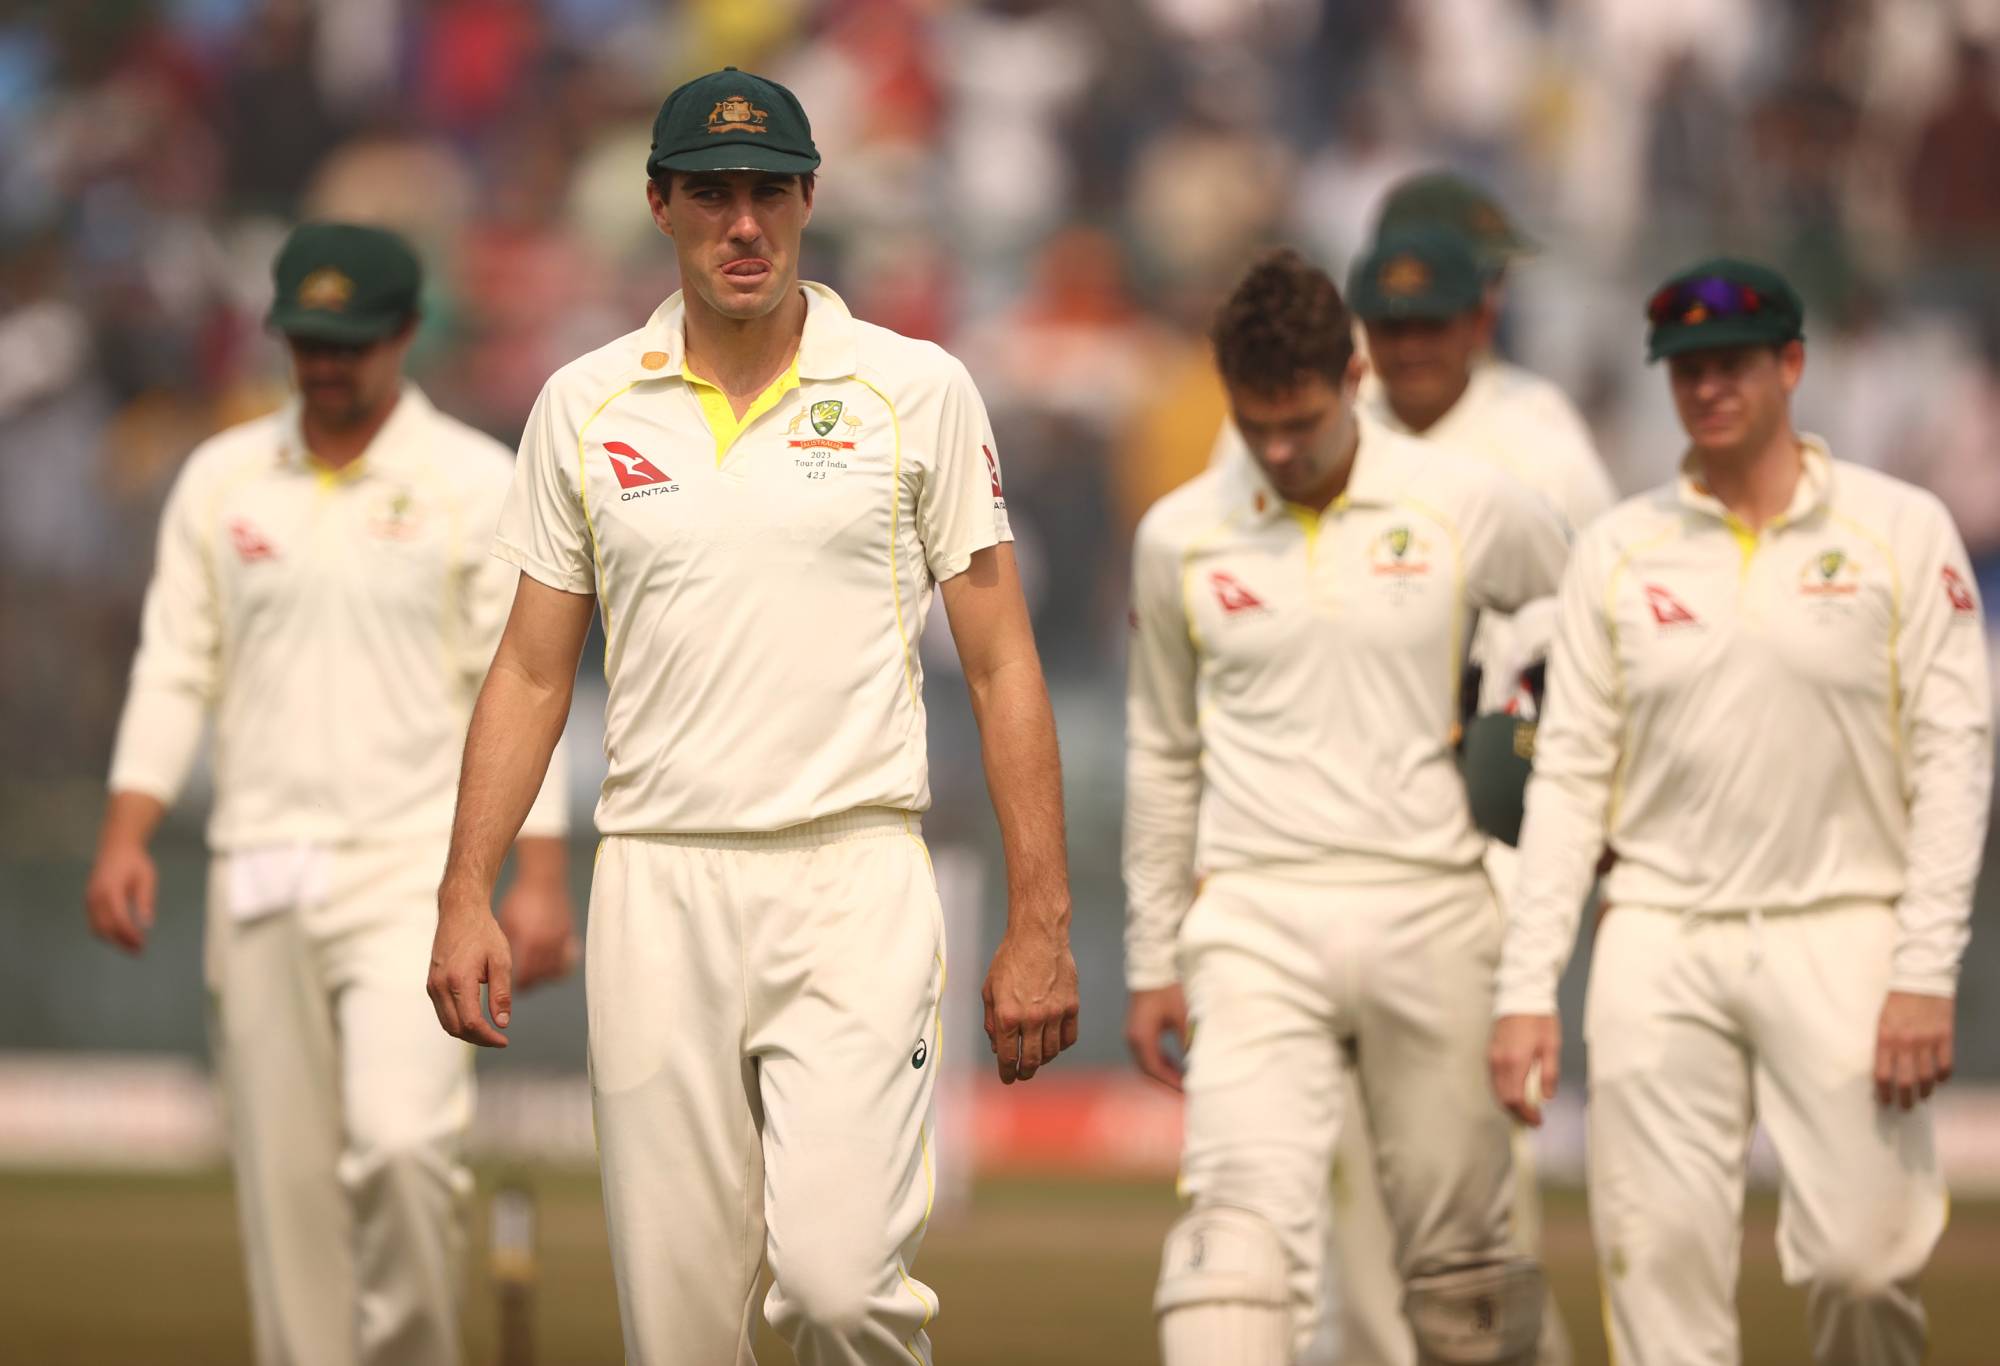 DELHI, INDIA - FEBRUARY 19: Pat Cummins of Australia leads the team off the ground after they were defeated by India during day three of the Second Test match in the series between India and Australia at Arun Jaitley Stadium on February 19, 2023 in Delhi, India. (Photo by Robert Cianflone/Getty Images)